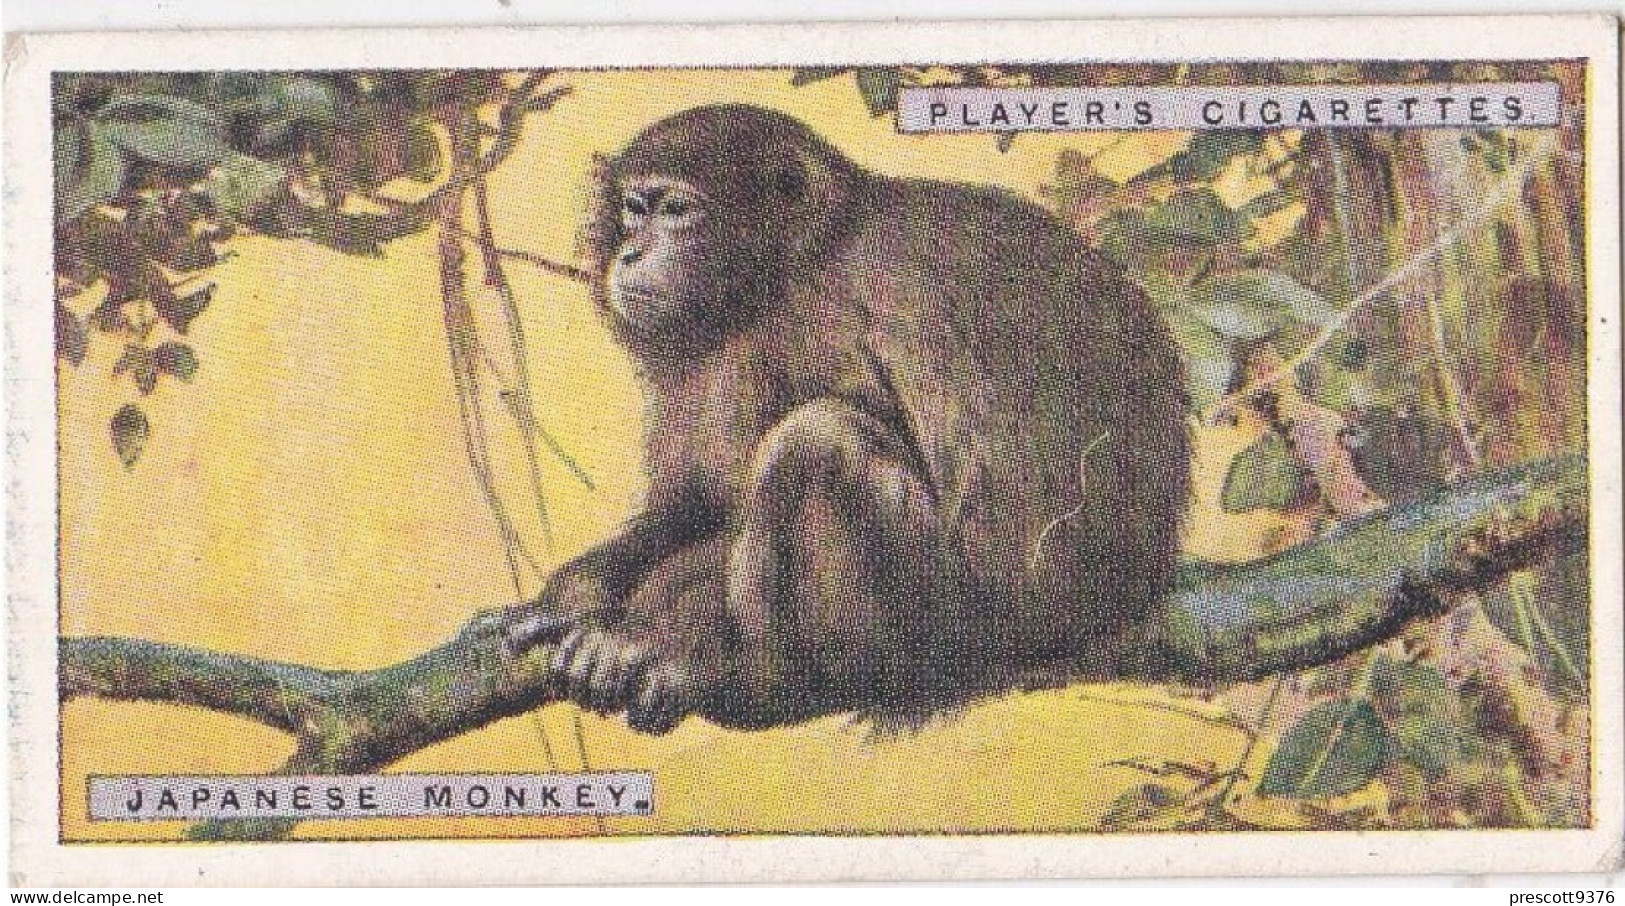 30 Japanese Monkey  - Natural History 1924 - Players Cigarette Card - Original - Player's